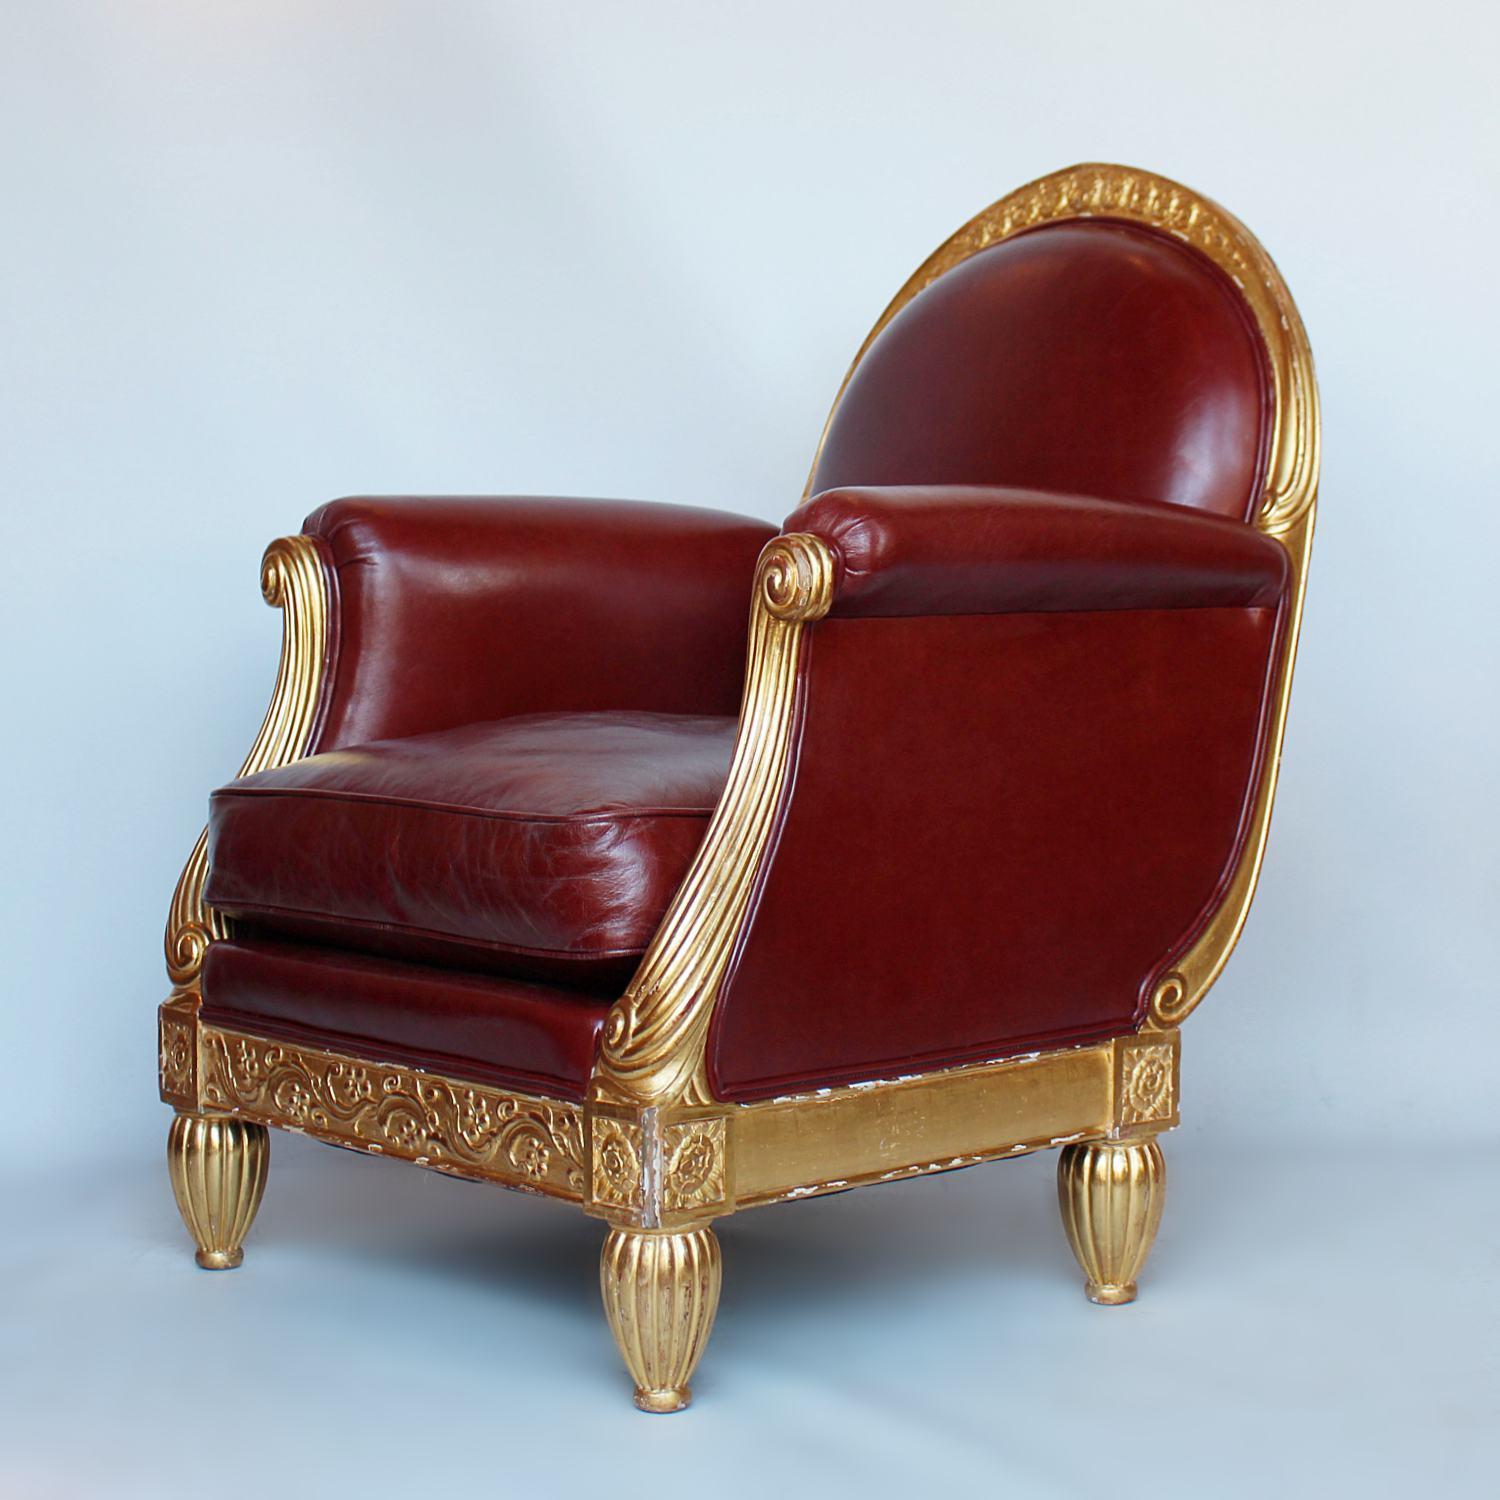 An Art Deco armchair, with carved gilt frame. Upholstered in English chestnut leather. Attributed to Paul Follot. 

Dimensions: H 95cm, W 70.5cm, D 70cm, seat H 45cm, seat D 53cm.

Origin: French

Date: circa 1925.

  